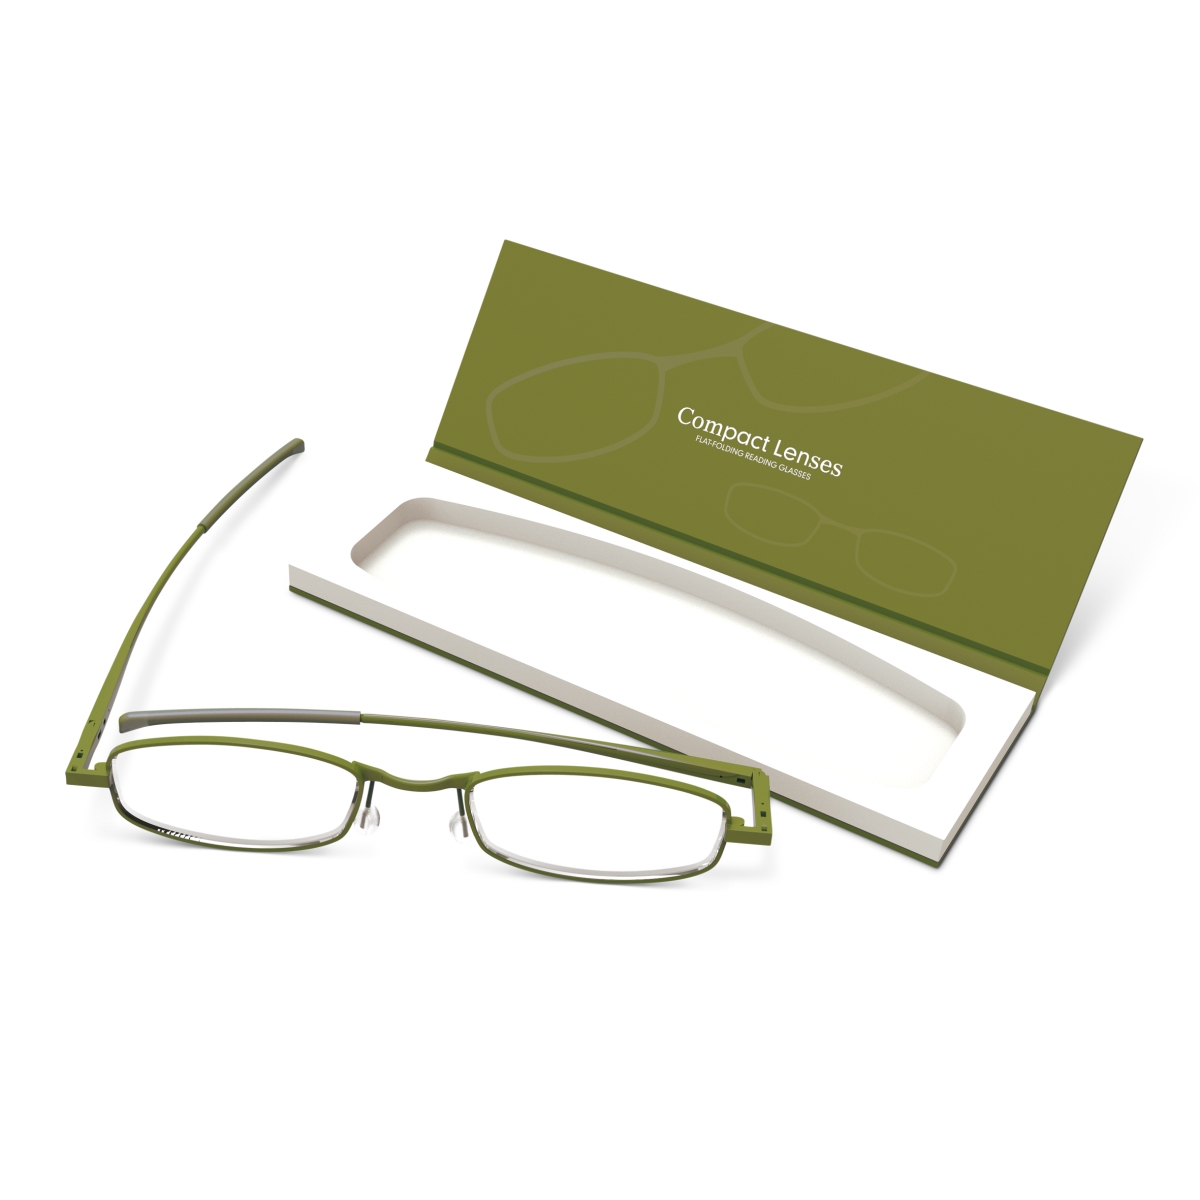 Picture of If USA 91726 Compact Lens Flat Folding Reading Glasses, Olive - Plus 1.0